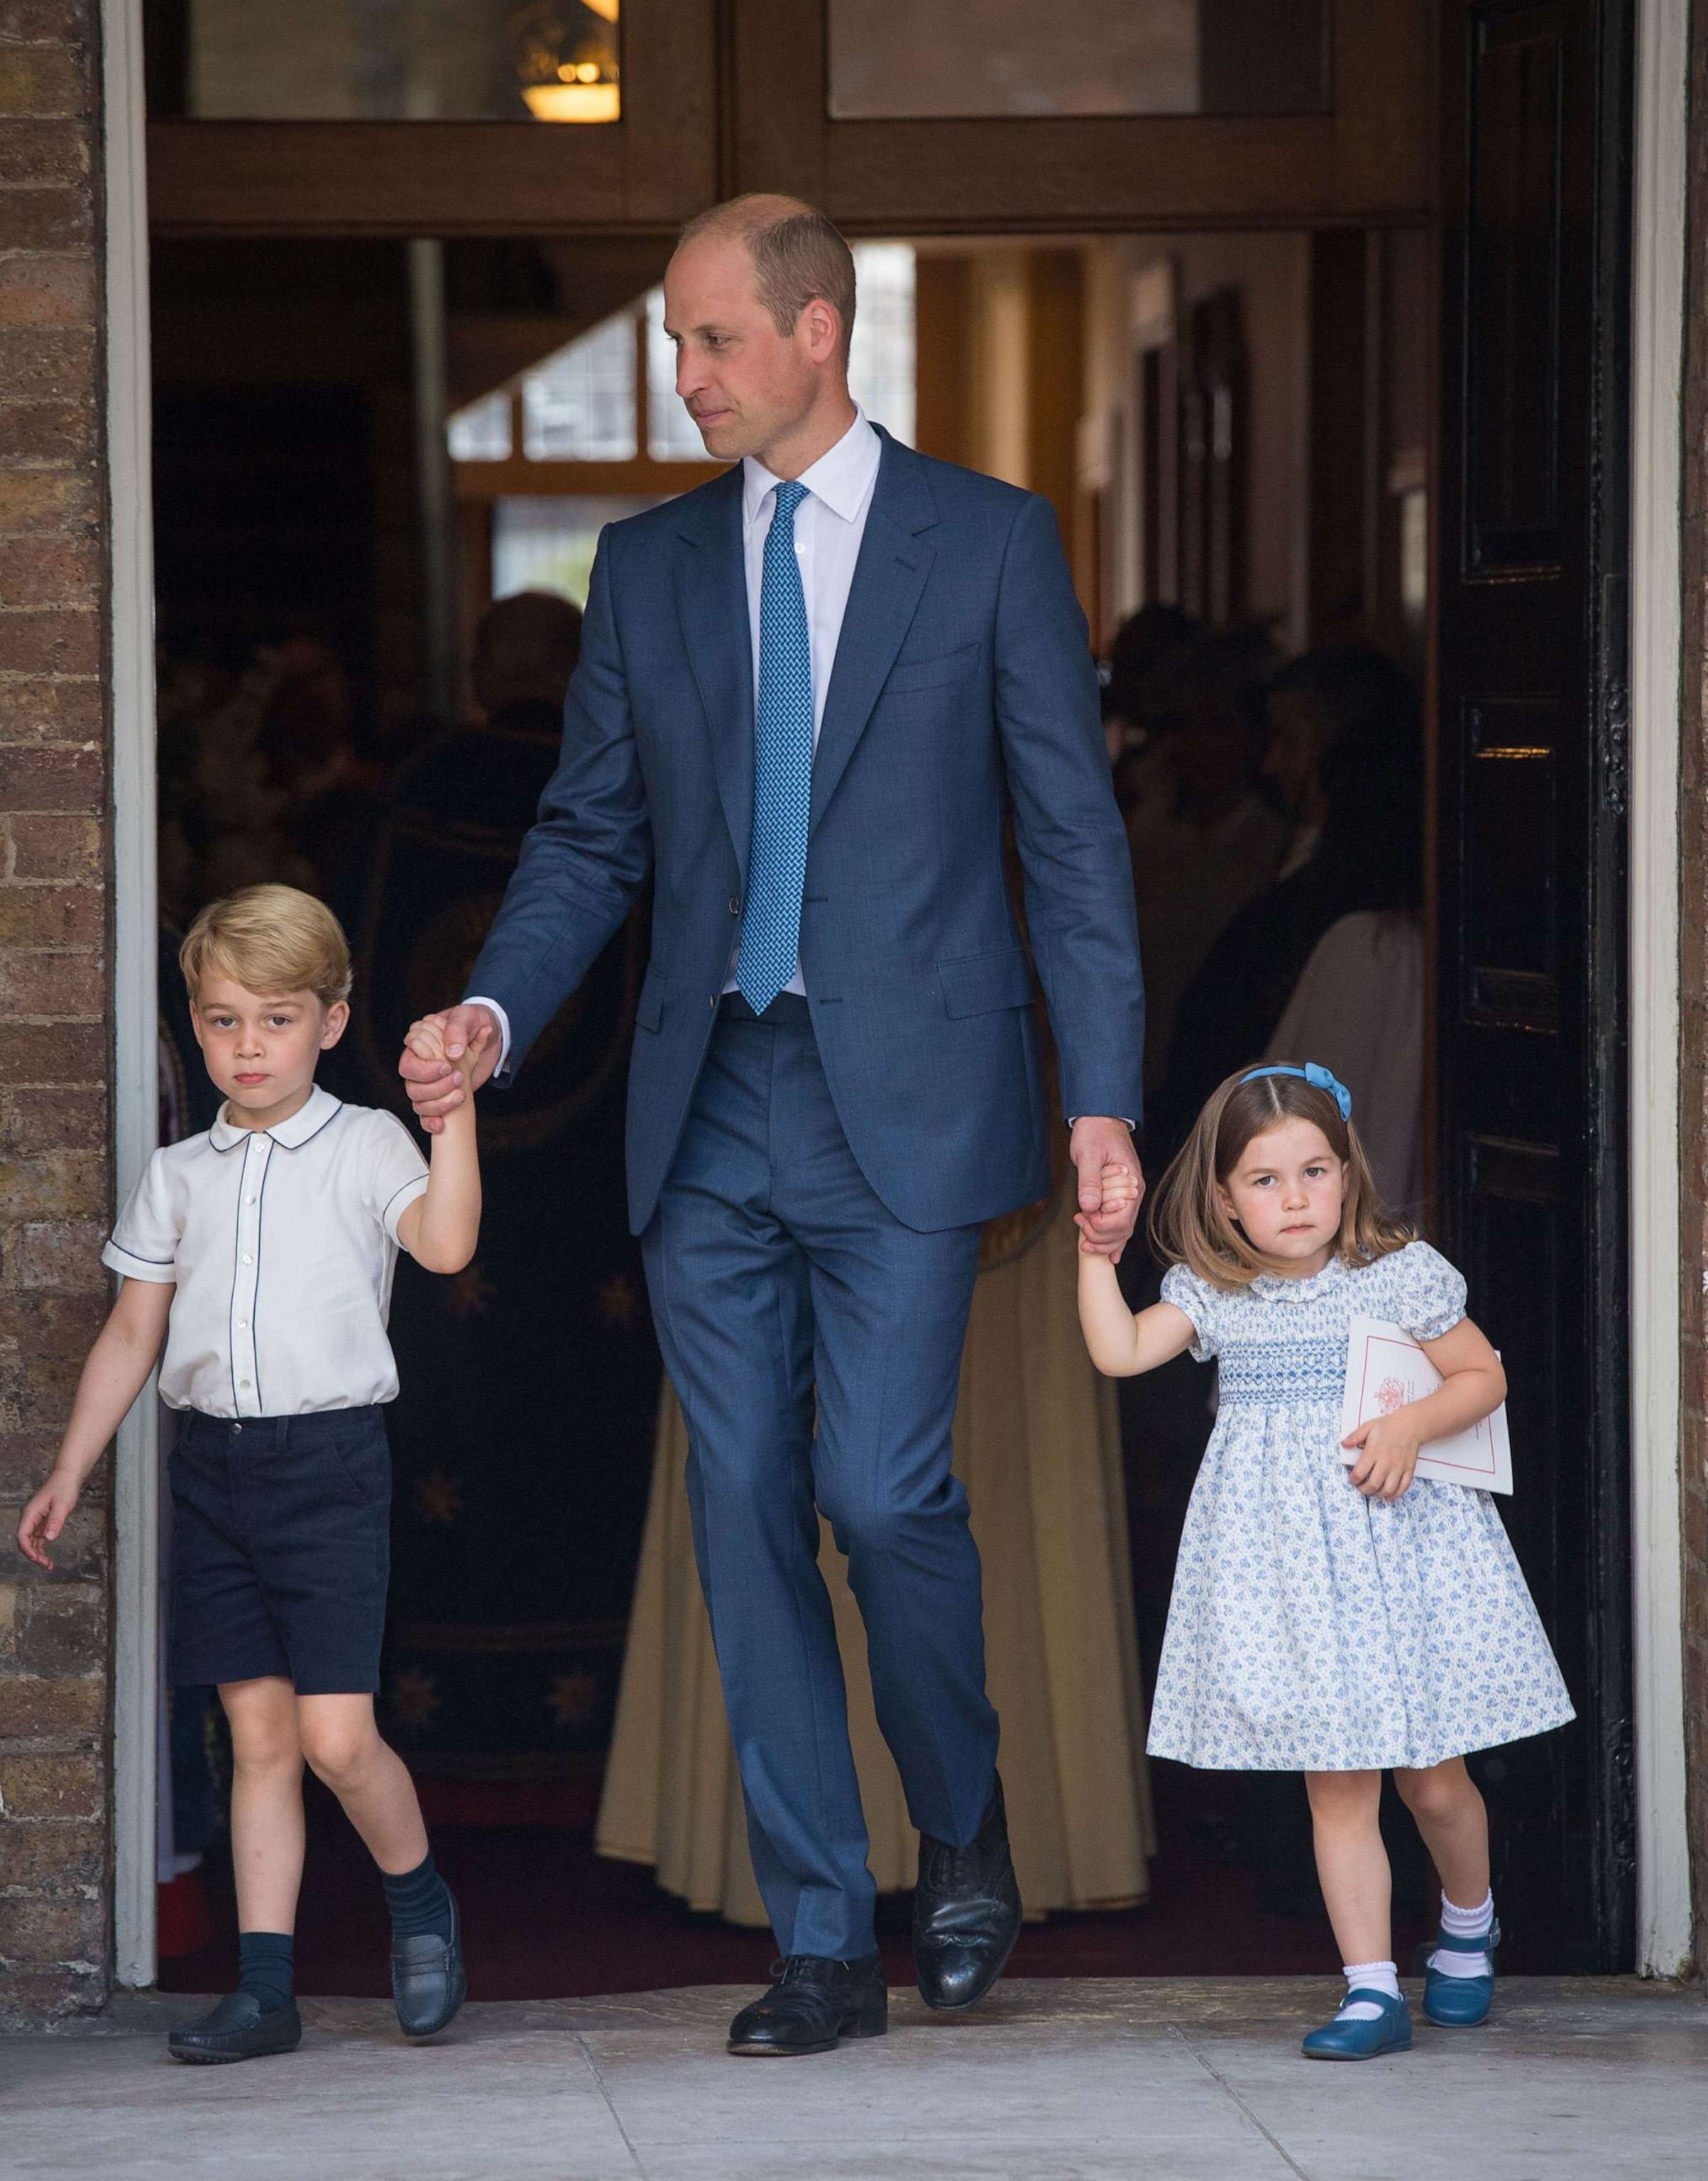 PHOTO: Prince William, Duke of Cambridge with Prince George and Princess Charlotte depart after attending Prince Louis' christening at the Chapel Royal, St James's Palace on July 9, 2018, in London.